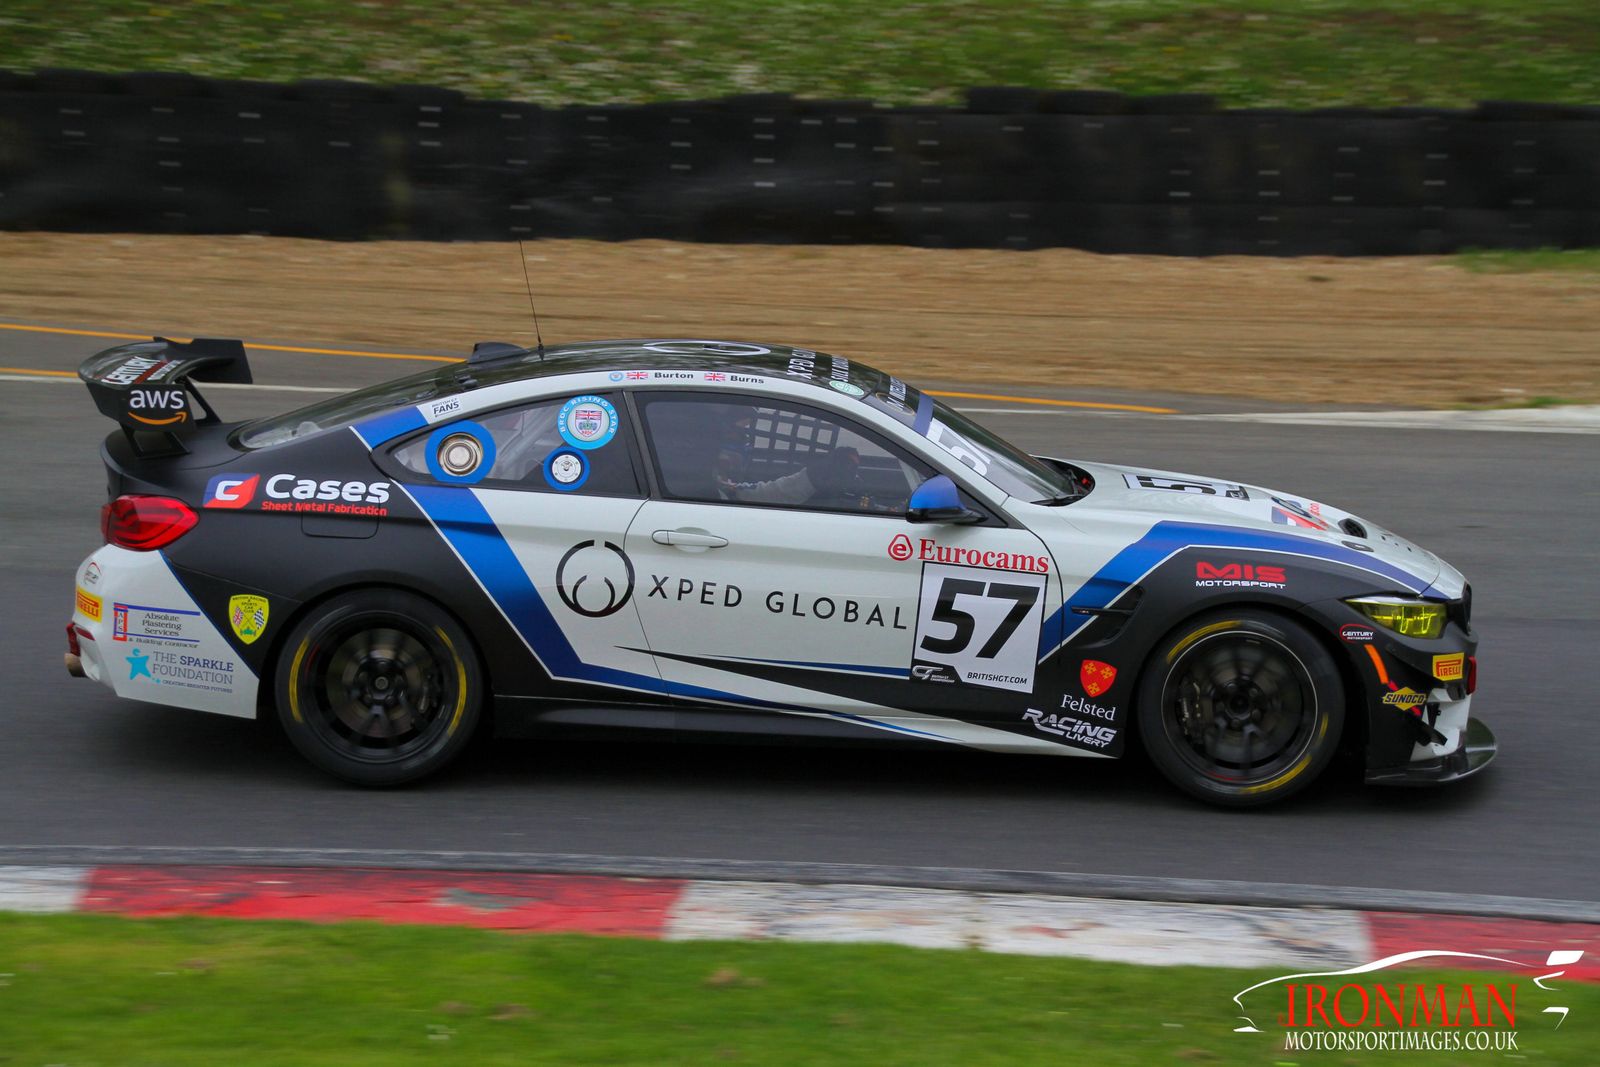 Igoe and Keen look untouchable as WPI Motorsport win the opening round of the British GT at Brands Hatch!!